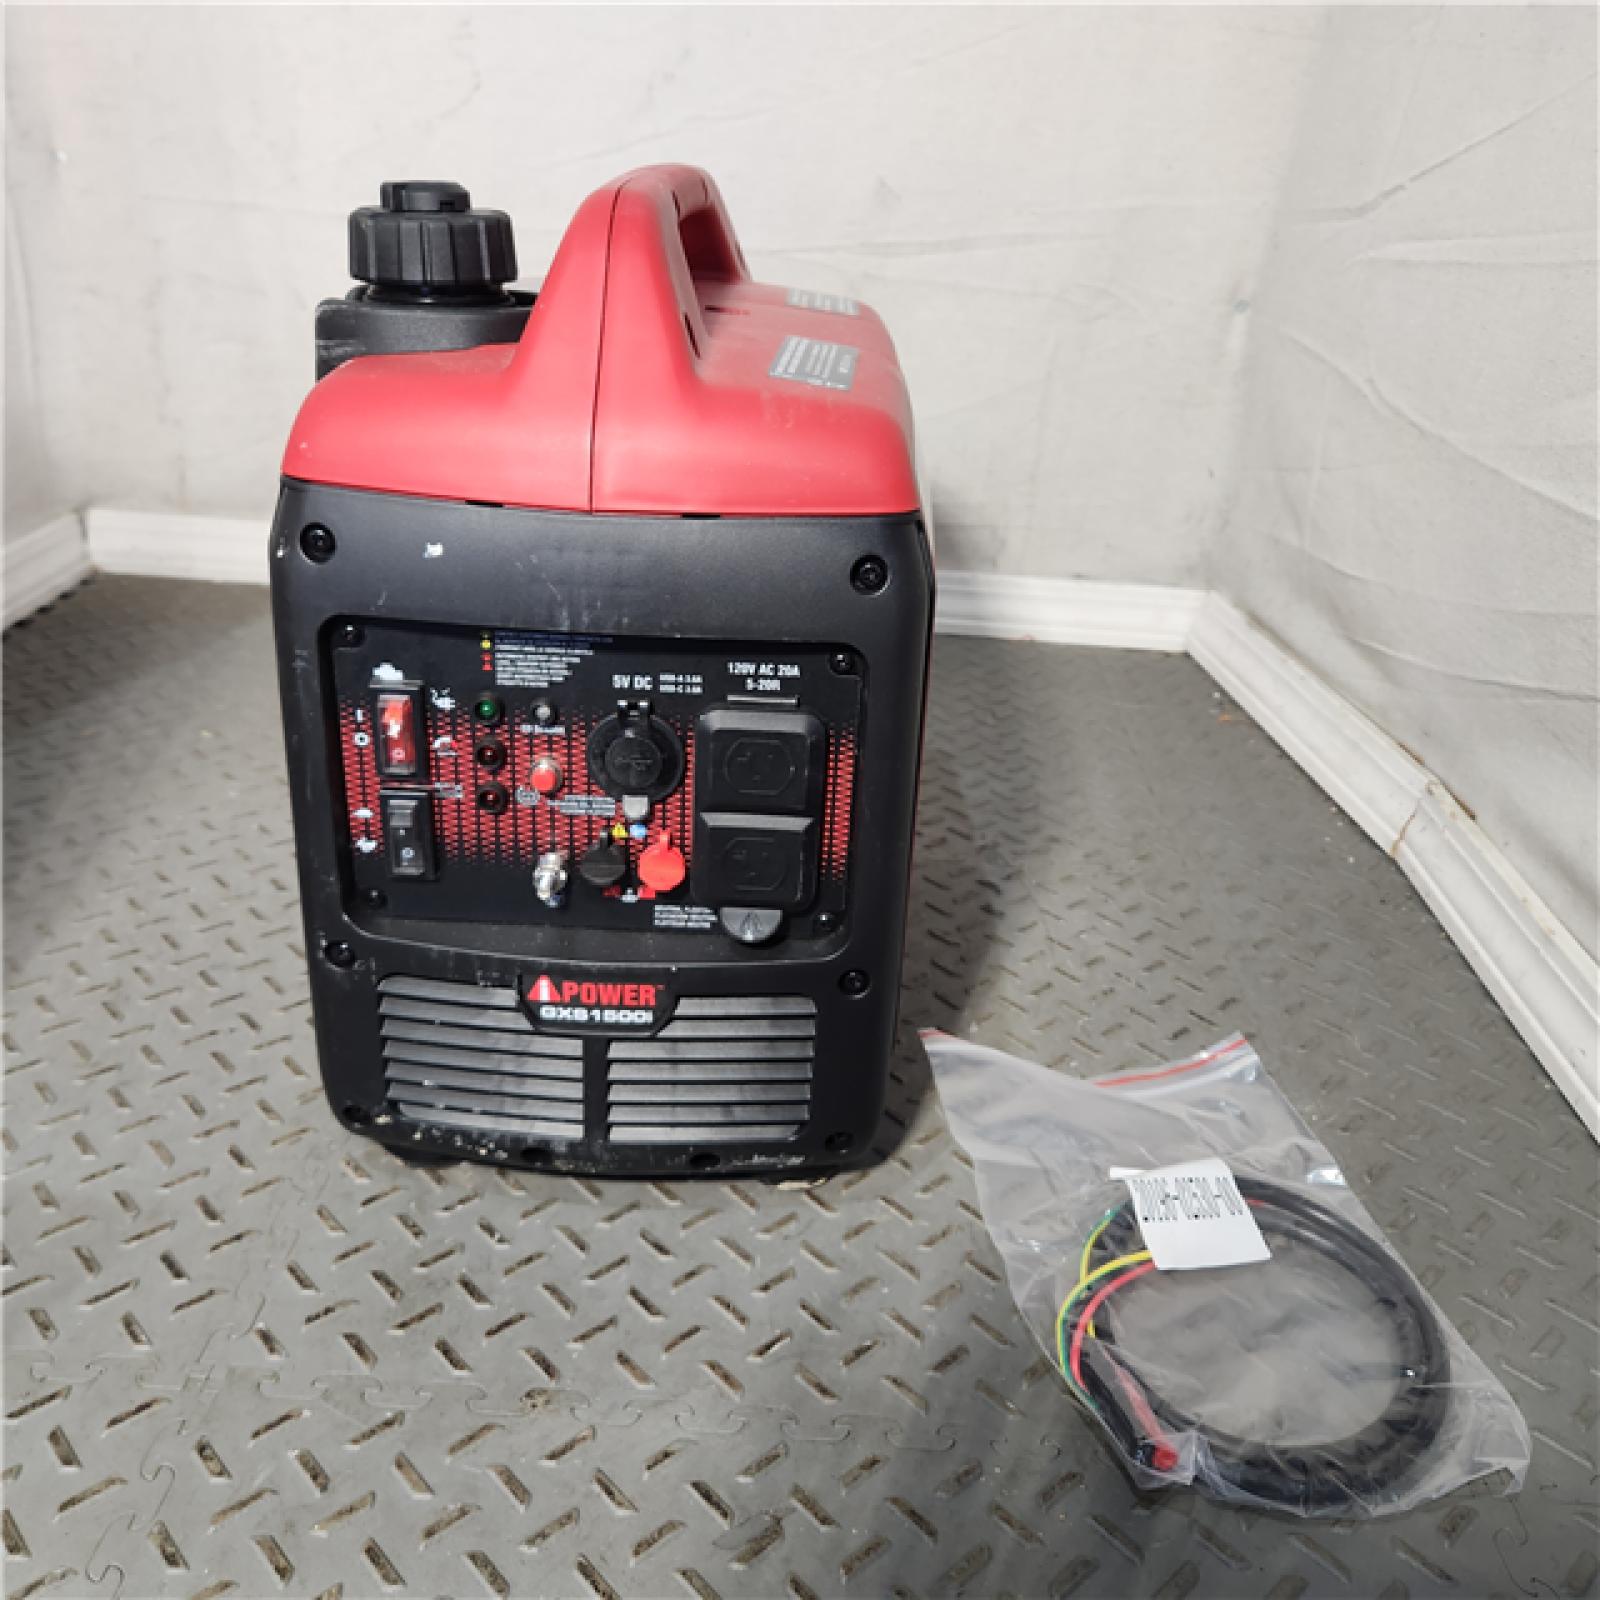 HOUSTON Location-AS-IS-A-iPower 1500-Watt Recoil Start Gasoline Powered Ultra-Light Inverter Generator with 60cc OHV Engine and CO Sensor Shutdown APPEARS IN APPEARS IN GOOD Condition